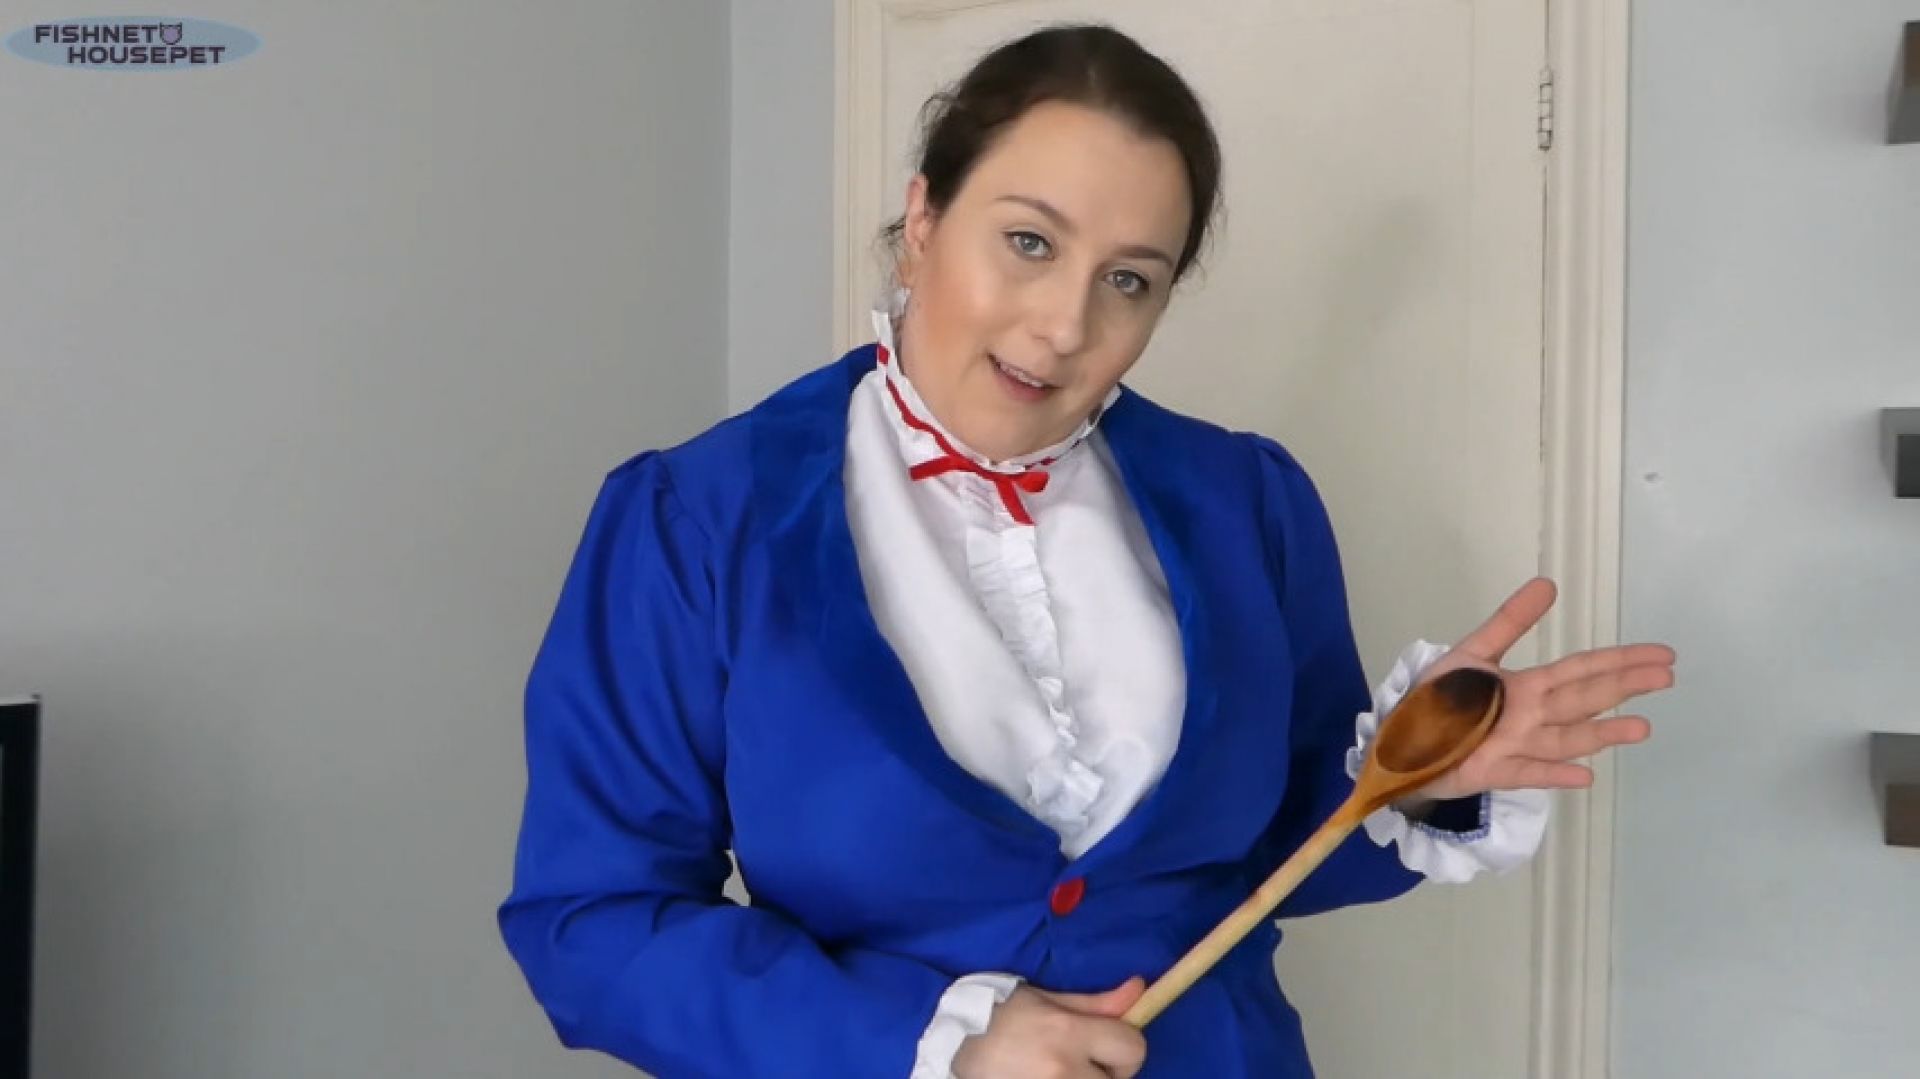 324 97 MB FHD Spanked By Nanny Poppins Fishnet Housepet 1080